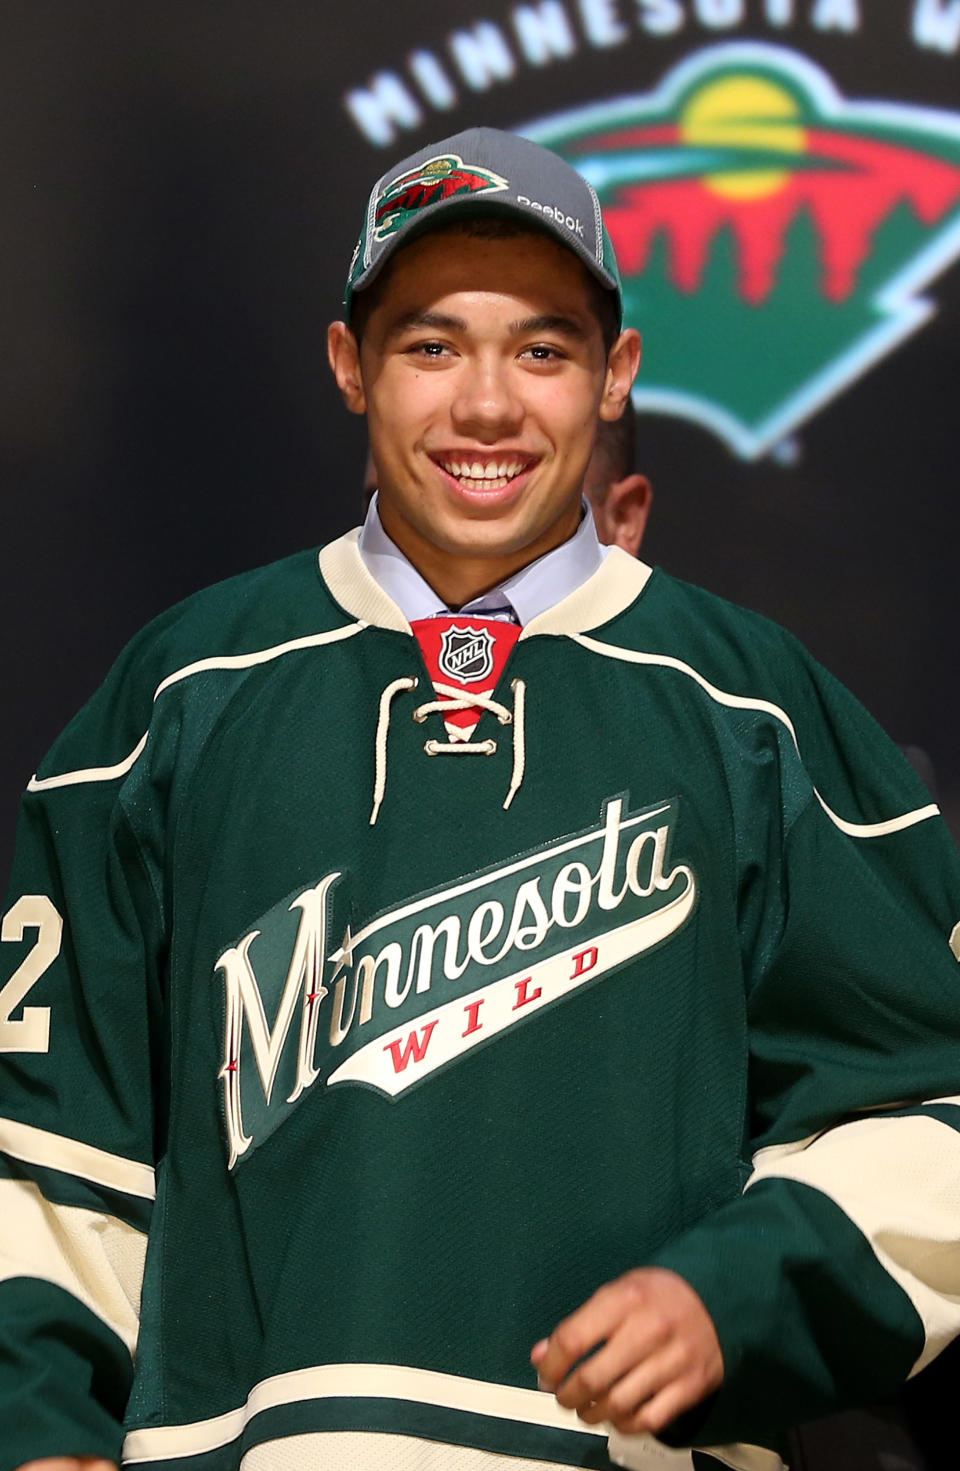 PITTSBURGH, PA - JUNE 22: Mathew Dumba, seventh overall pick by the Minnesota Wild, poses on stage during Round One of the 2012 NHL Entry Draft at Consol Energy Center on June 22, 2012 in Pittsburgh, Pennsylvania. (Photo by Bruce Bennett/Getty Images)